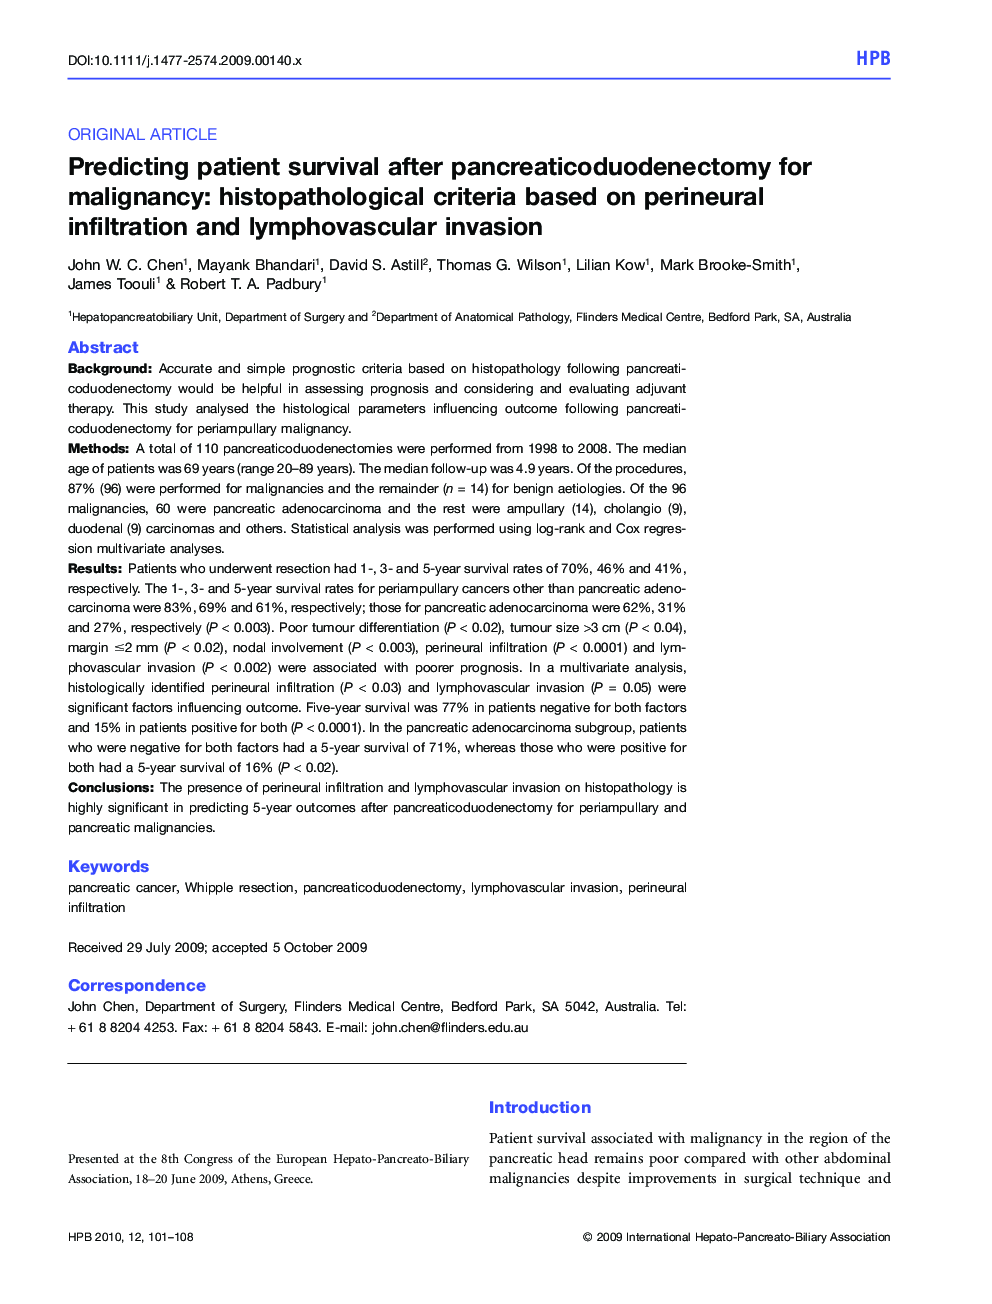 Predicting patient survival after pancreaticoduodenectomy for malignancy: histopathological criteria based on perineural infiltration and lymphovascular invasion